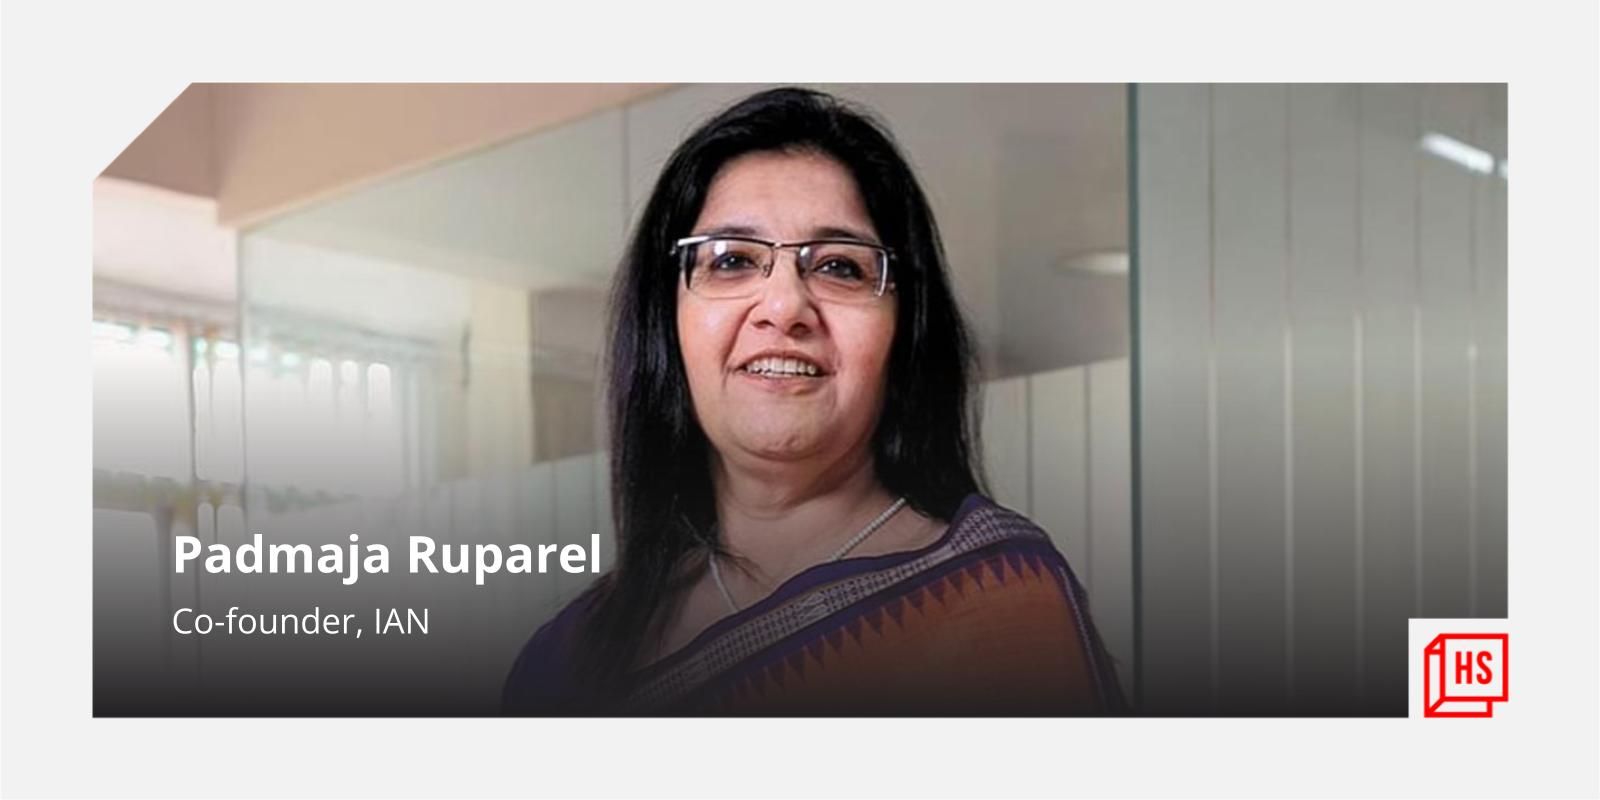 [Women’s Day] There are a lot of spaces where ventures can be started; the person matters: Padmaja Ruparel of IAN